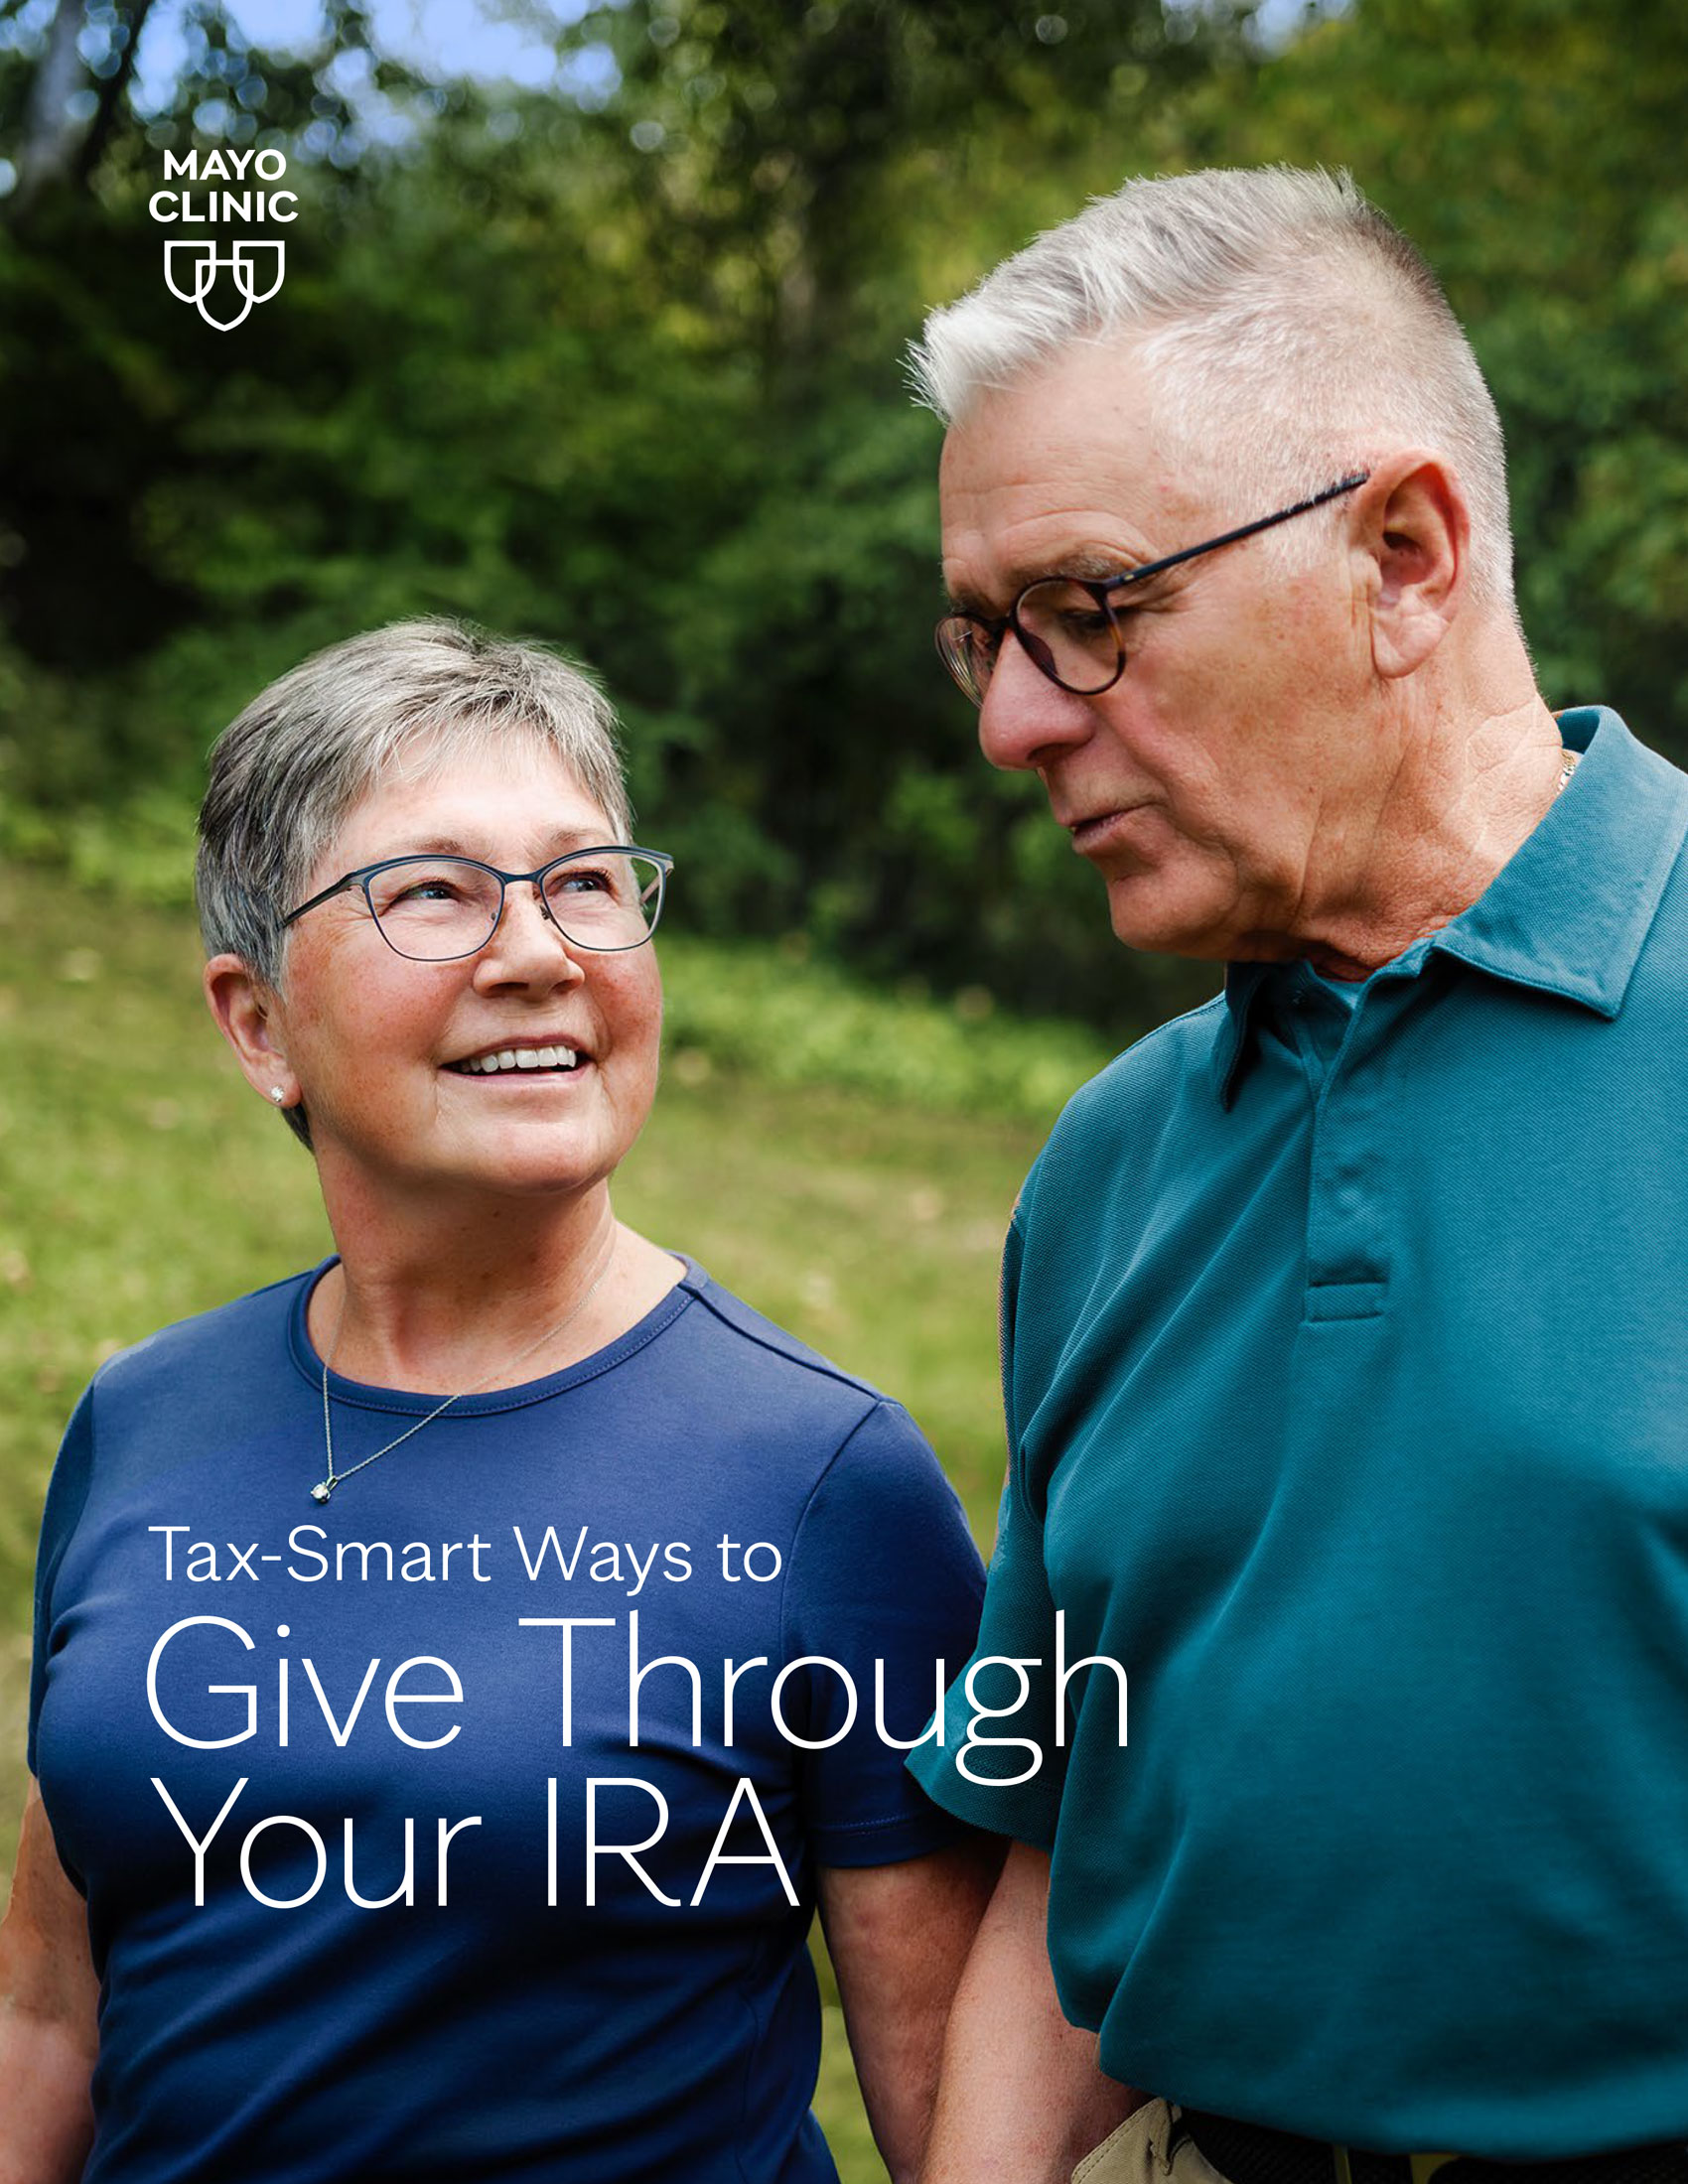 A Tax-Smart Way to Give Through Your IRA